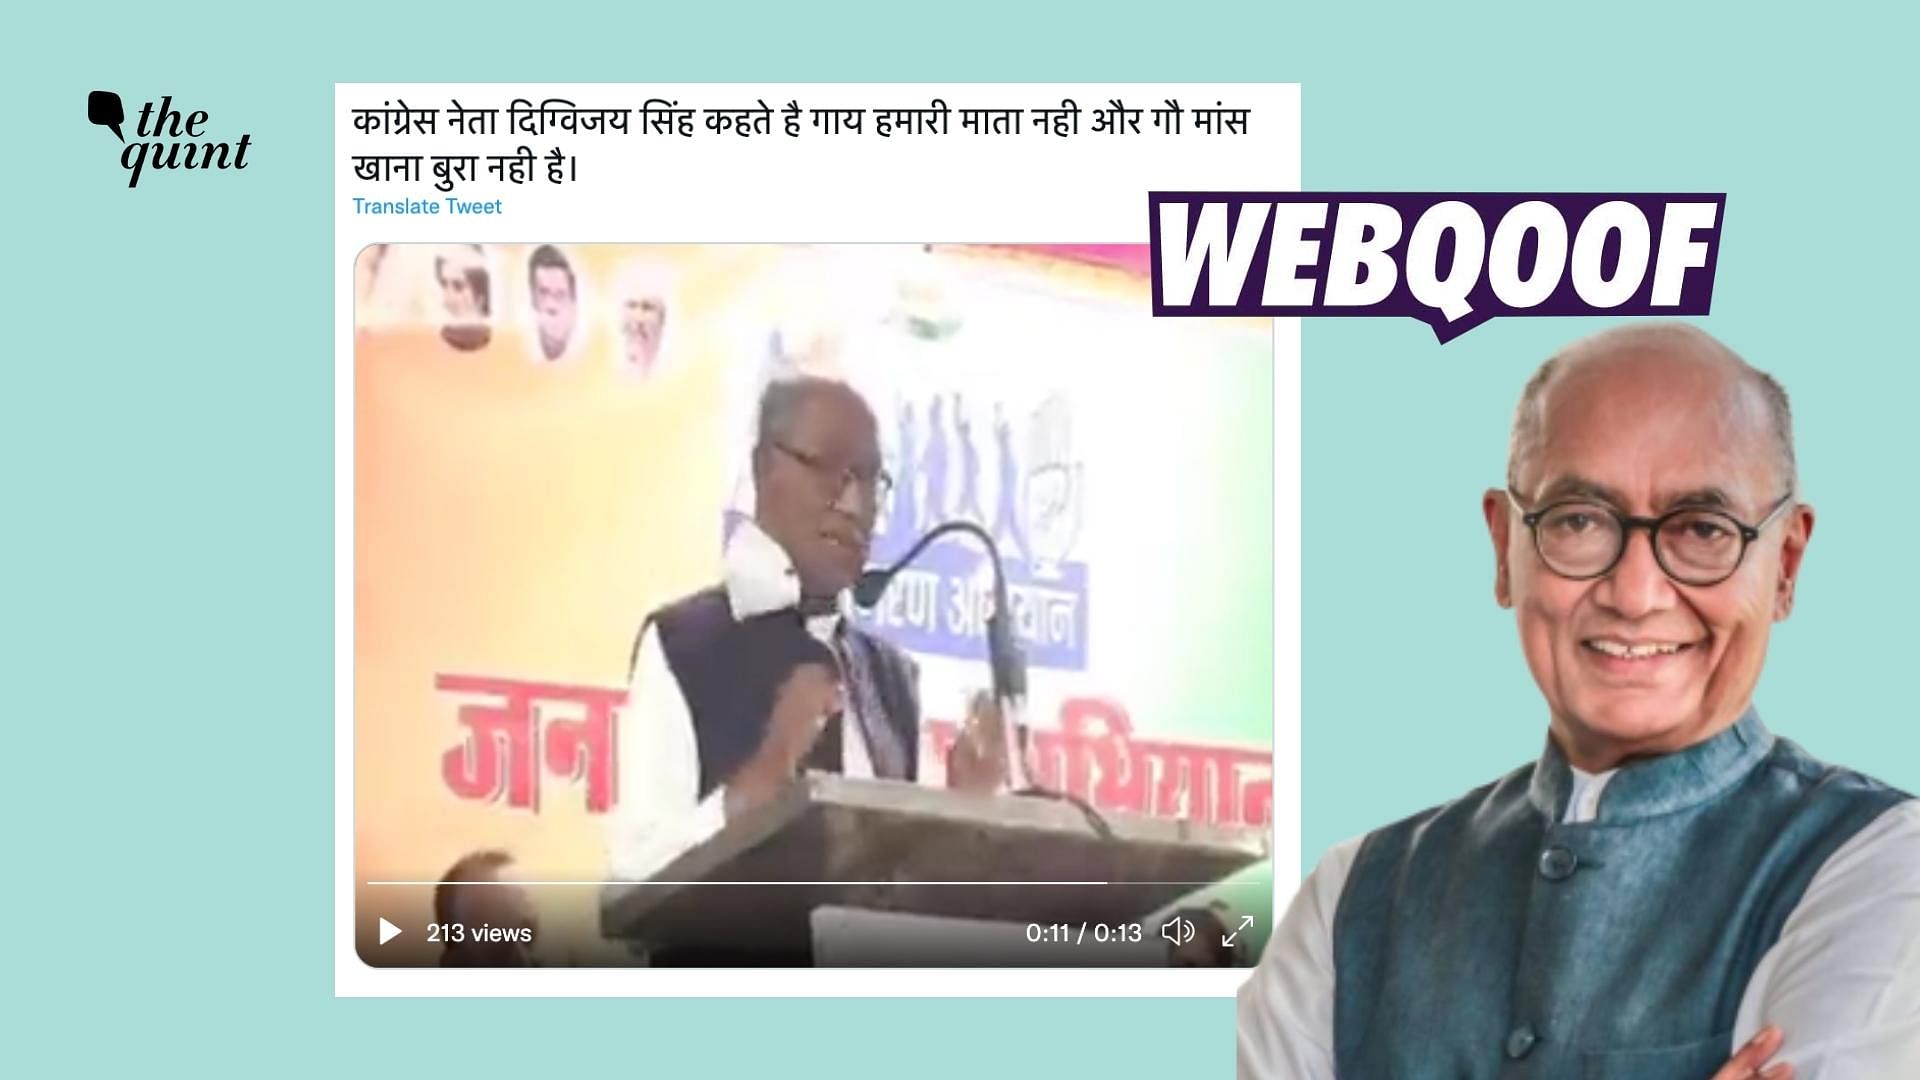 <div class="paragraphs"><p>The claim states that Congress leader Digvijaya Singh has said that there should be no problem in consuming beef.&nbsp;</p></div>